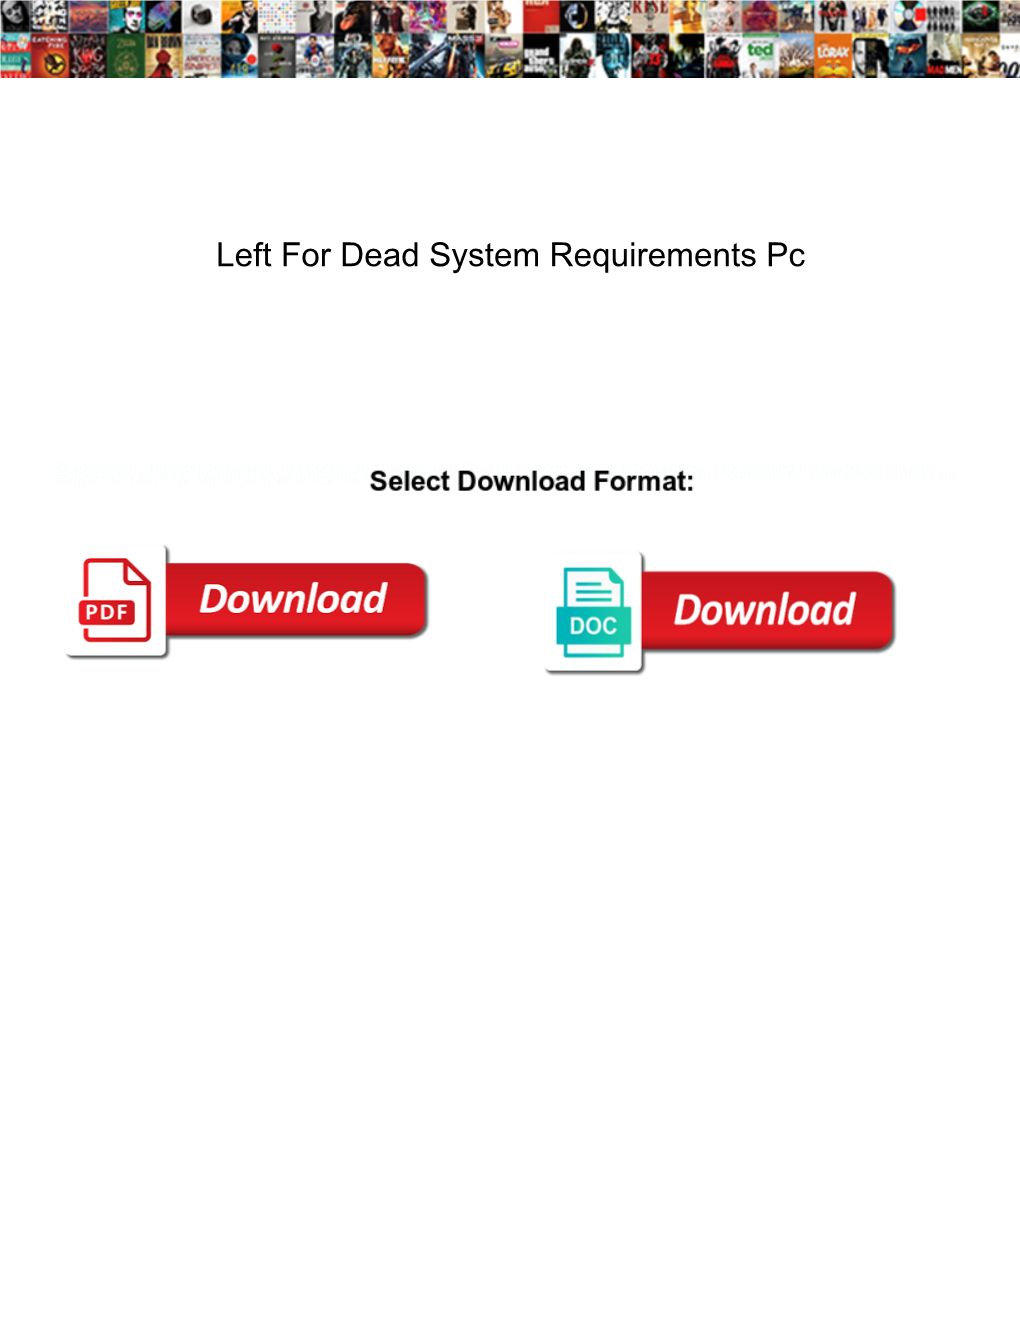 Left for Dead System Requirements Pc